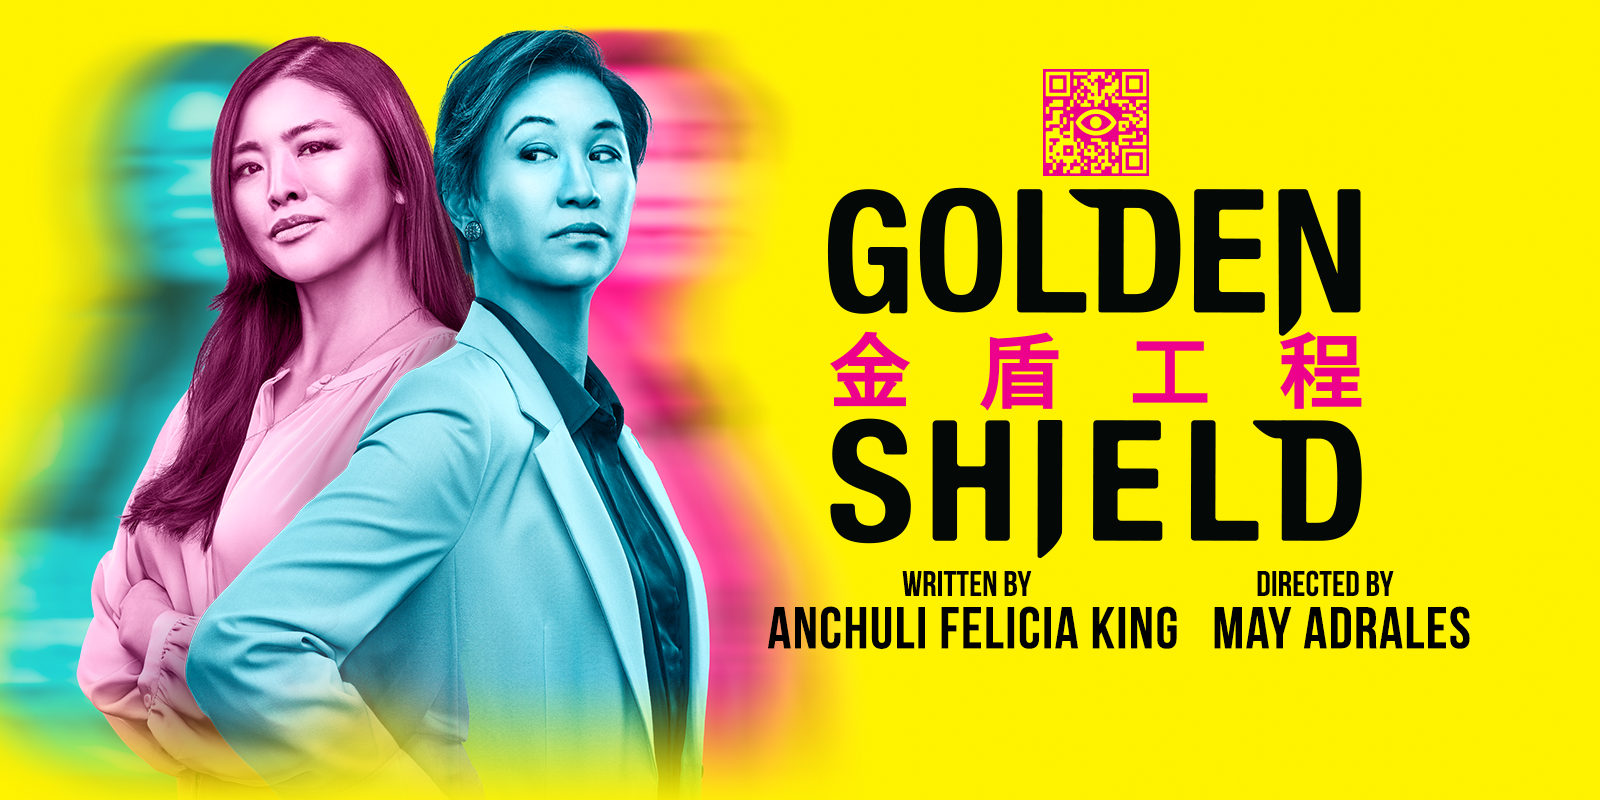 Golden Shield. Written by Anchuli Felicia King. Directed by May Adrales.